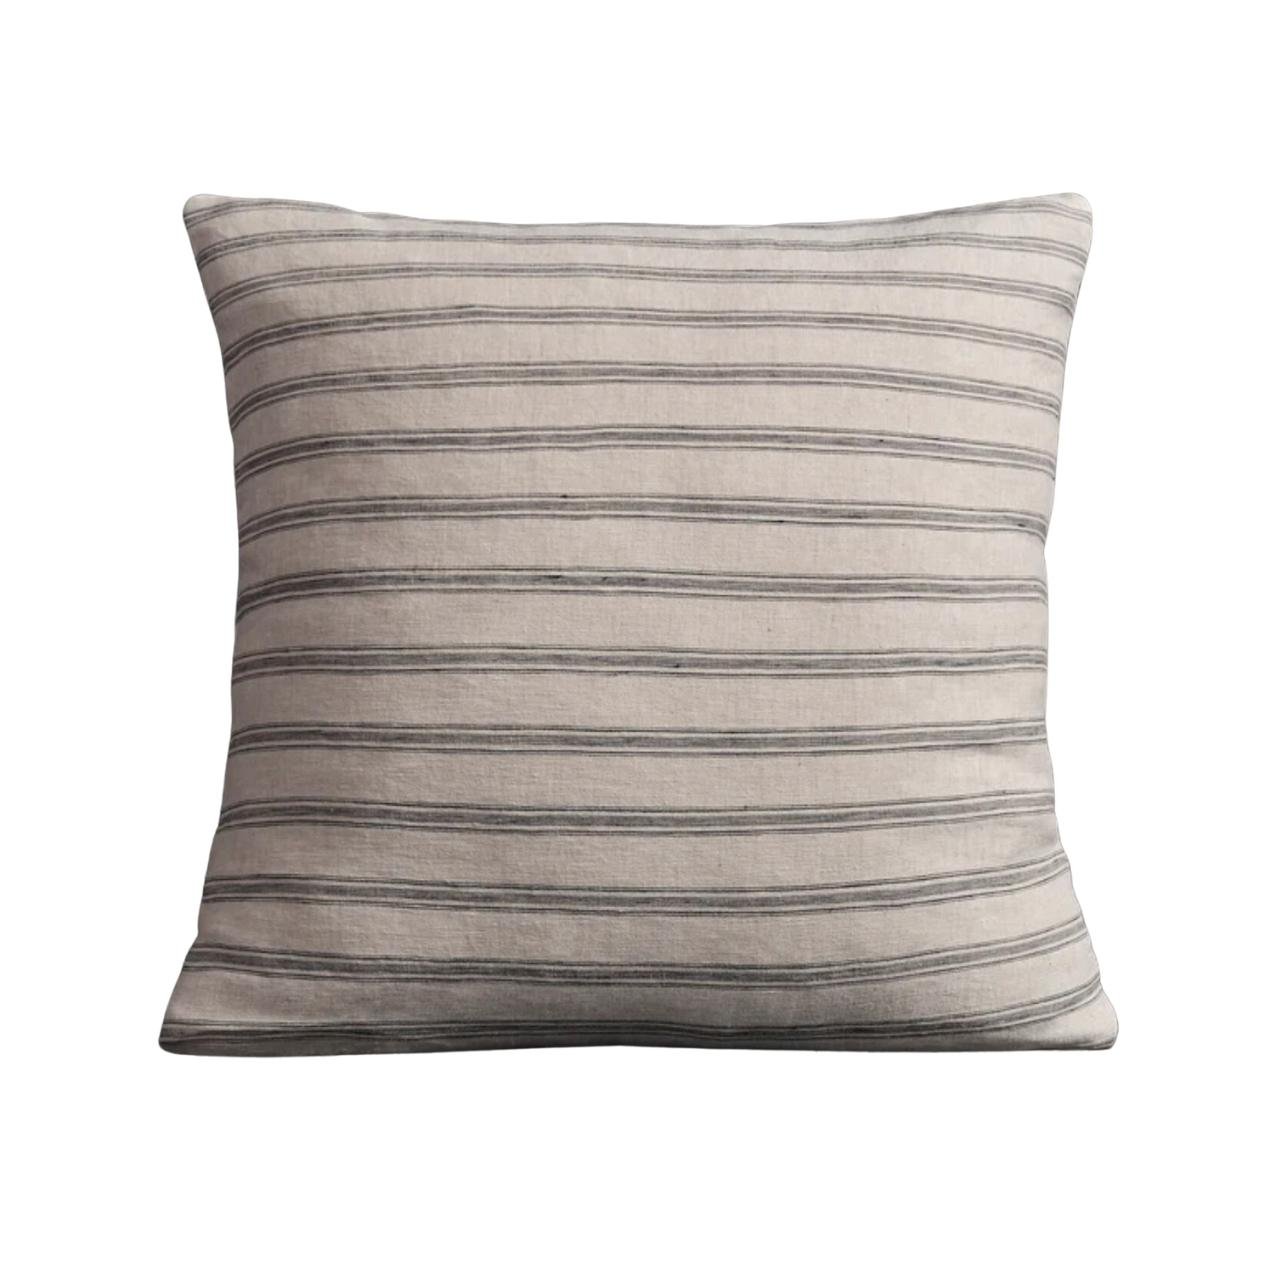 James Perse striped throw pillow with a piping stripe design